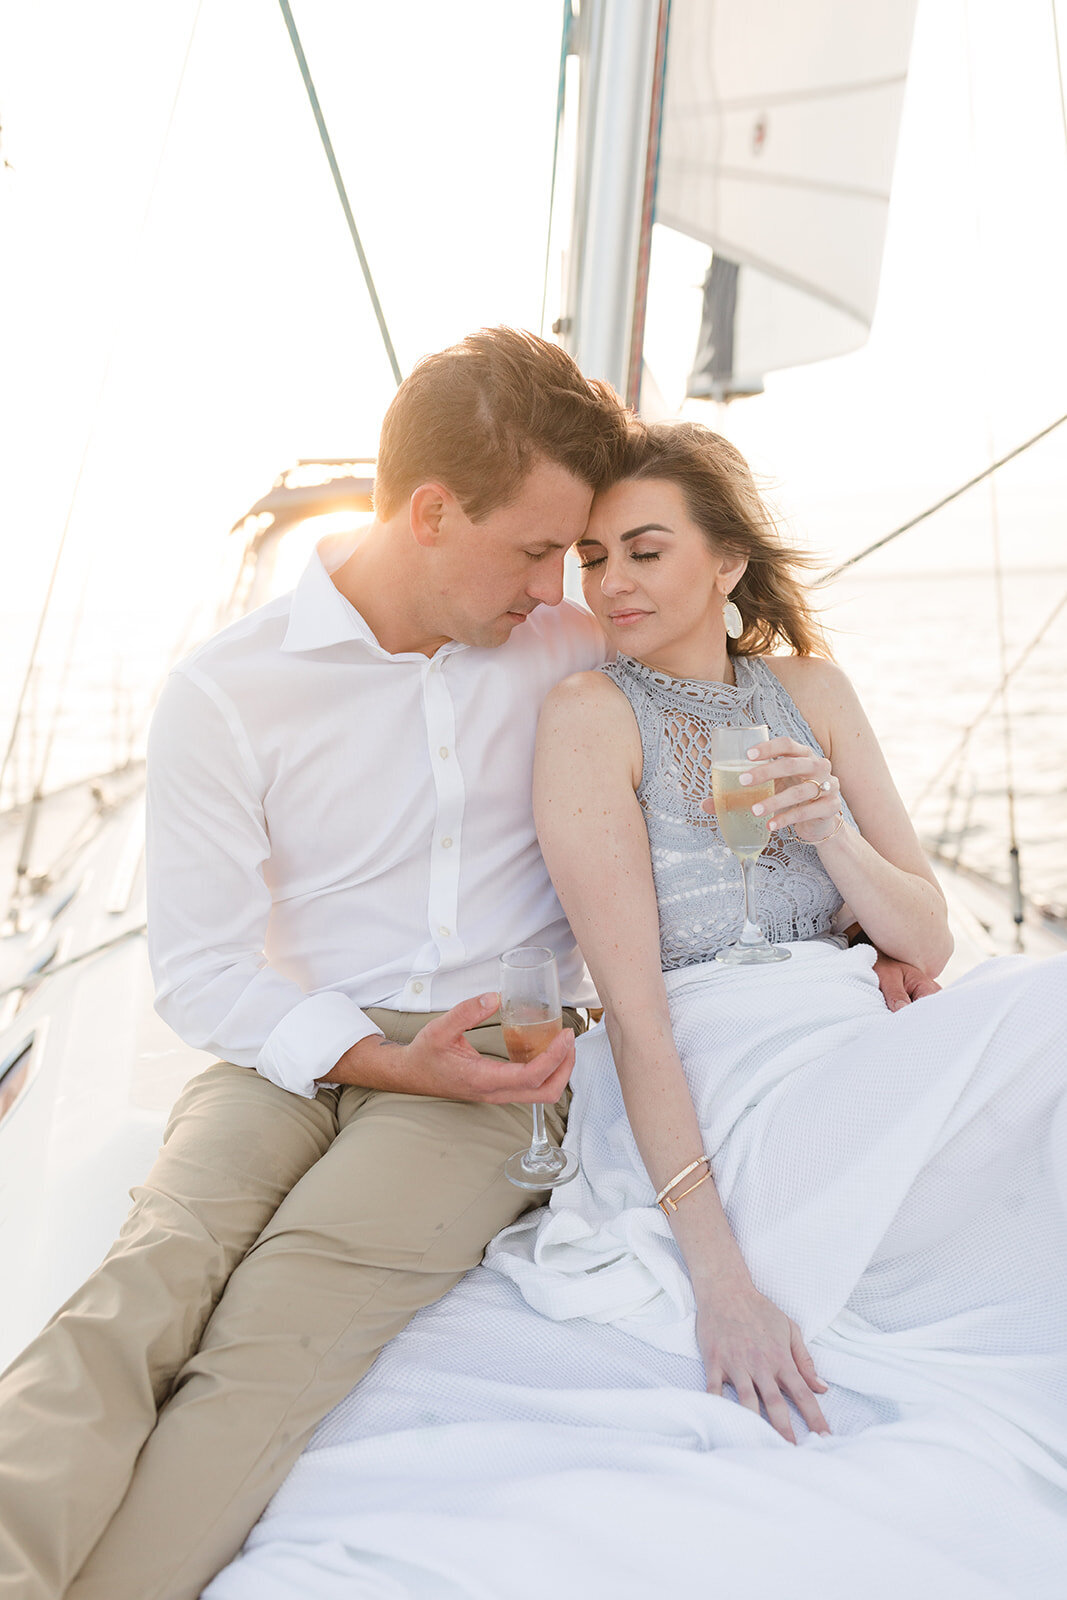 Engagement photos of couple embracing on a sailboat with champagne